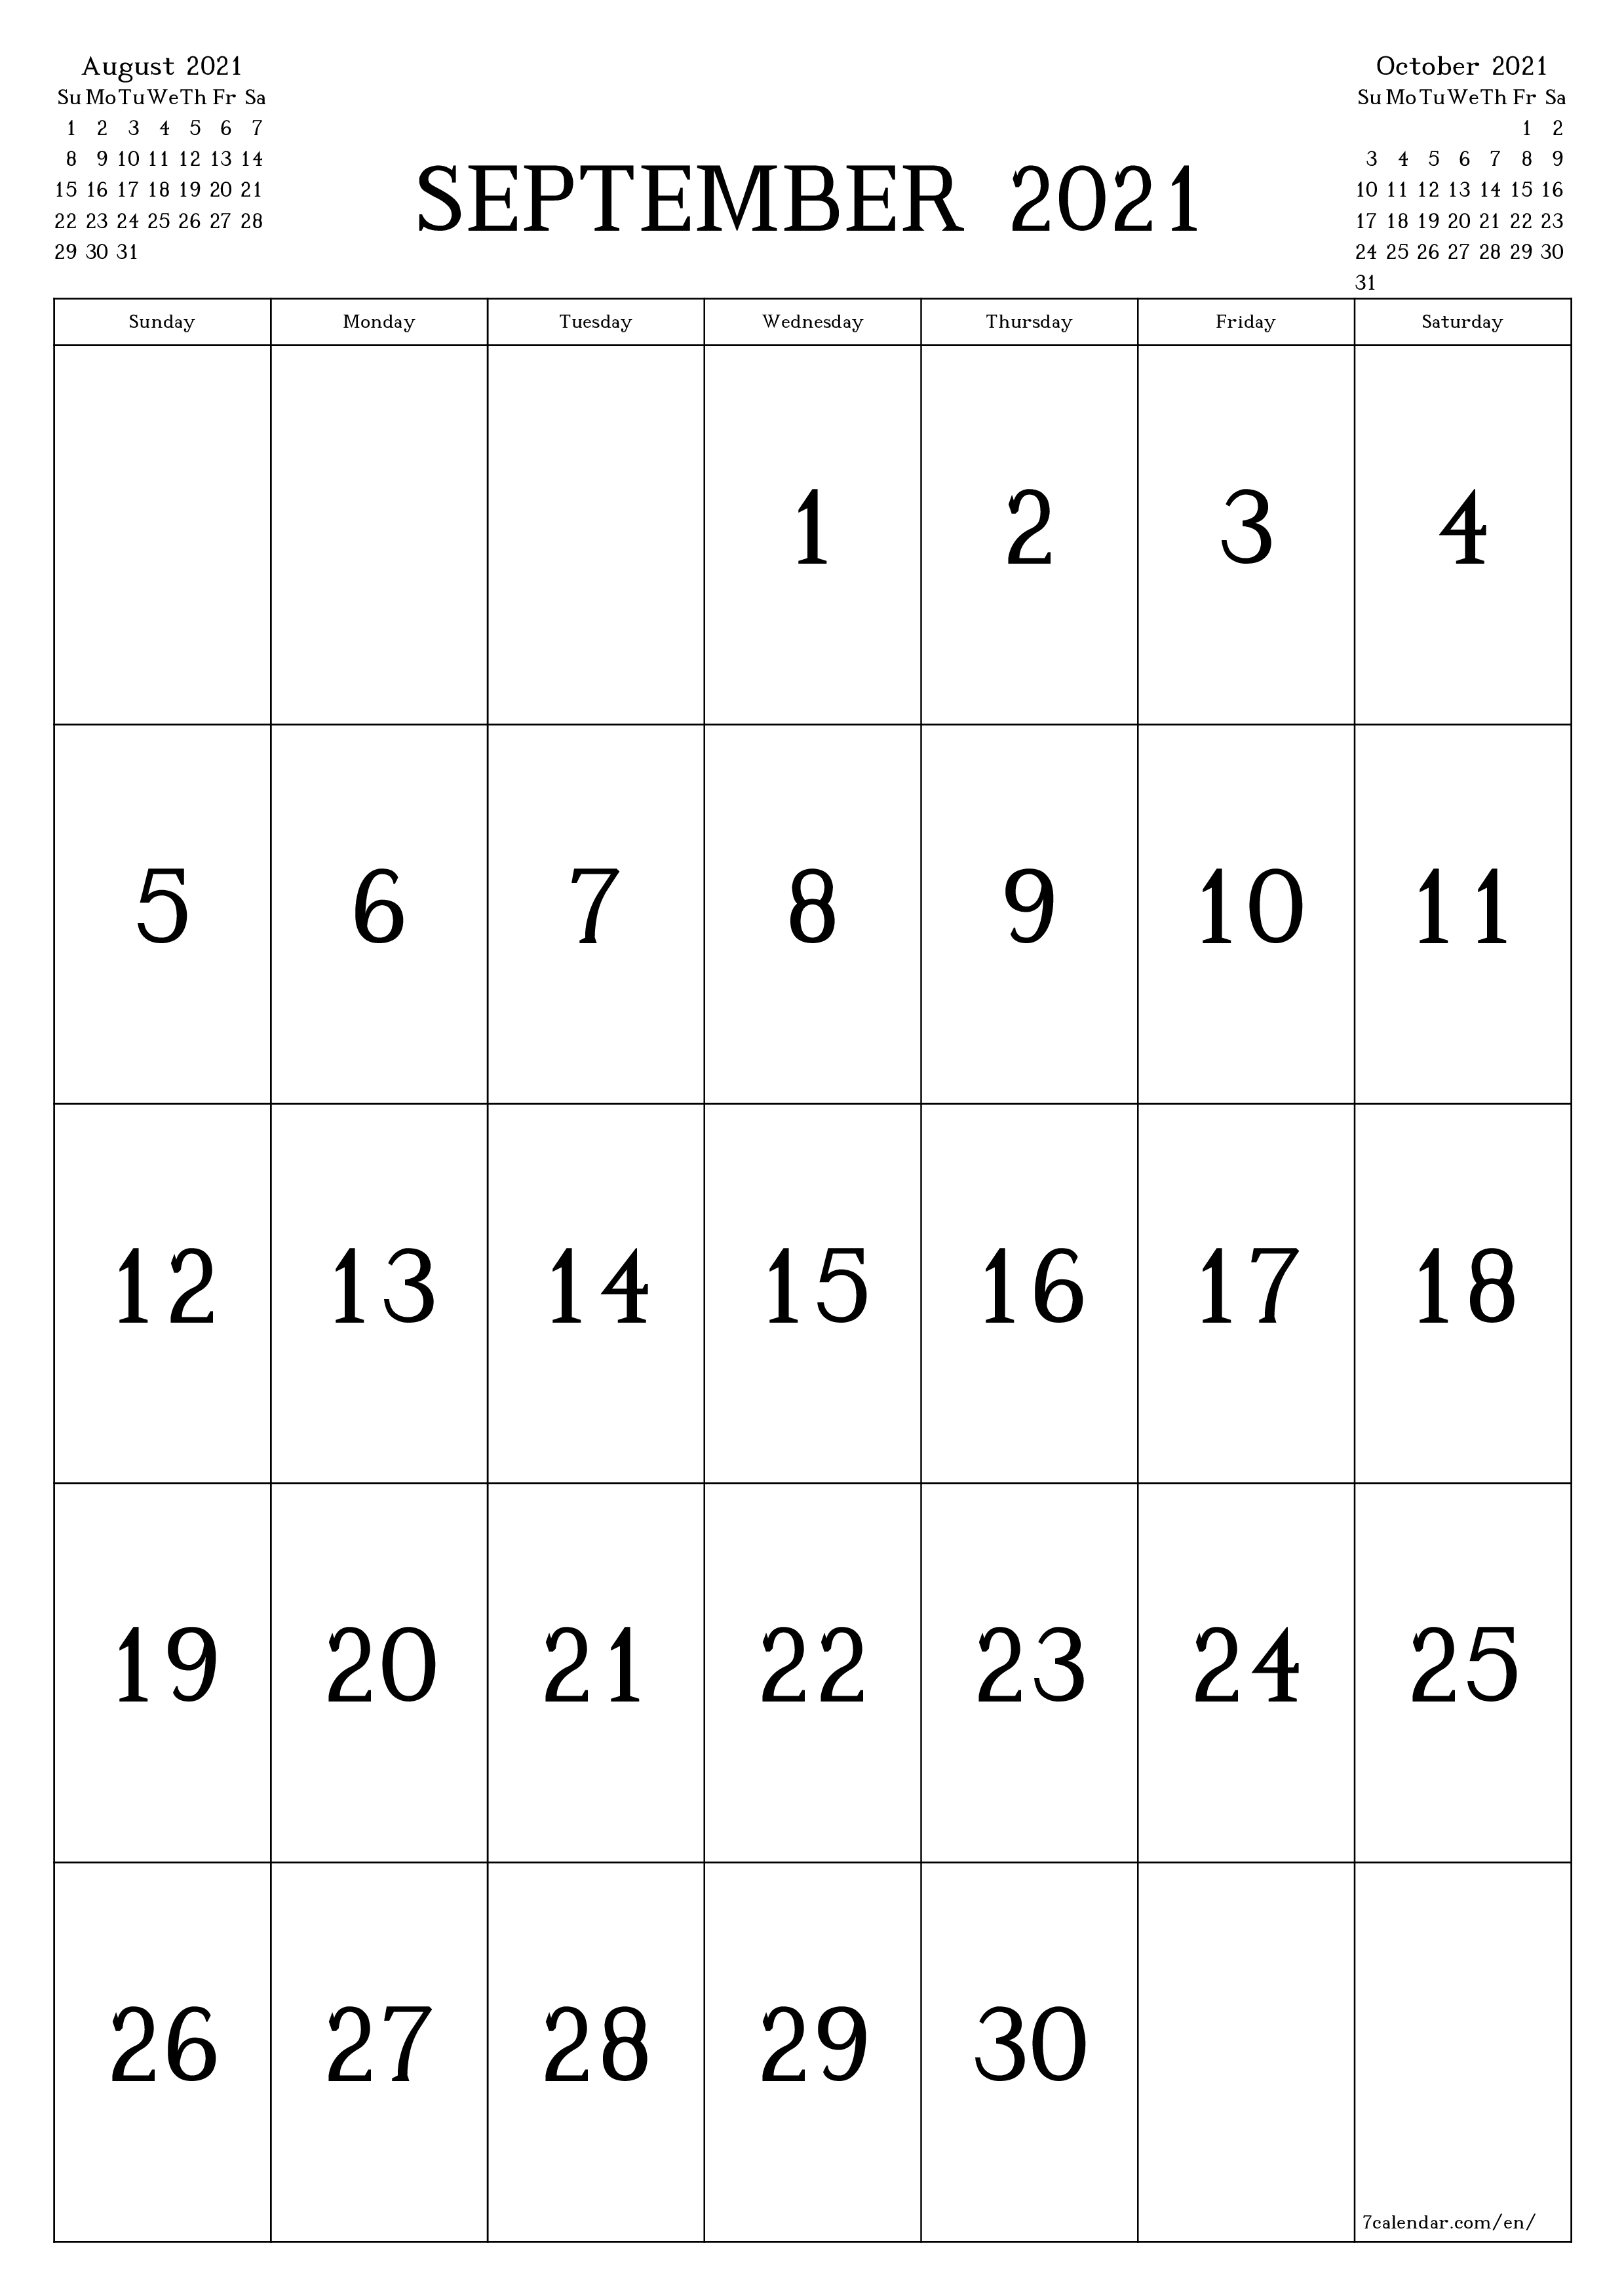 Blank monthly printable calendar and planner for month September 2021 with notes save and print to PDF PNG English - 7calendar.com